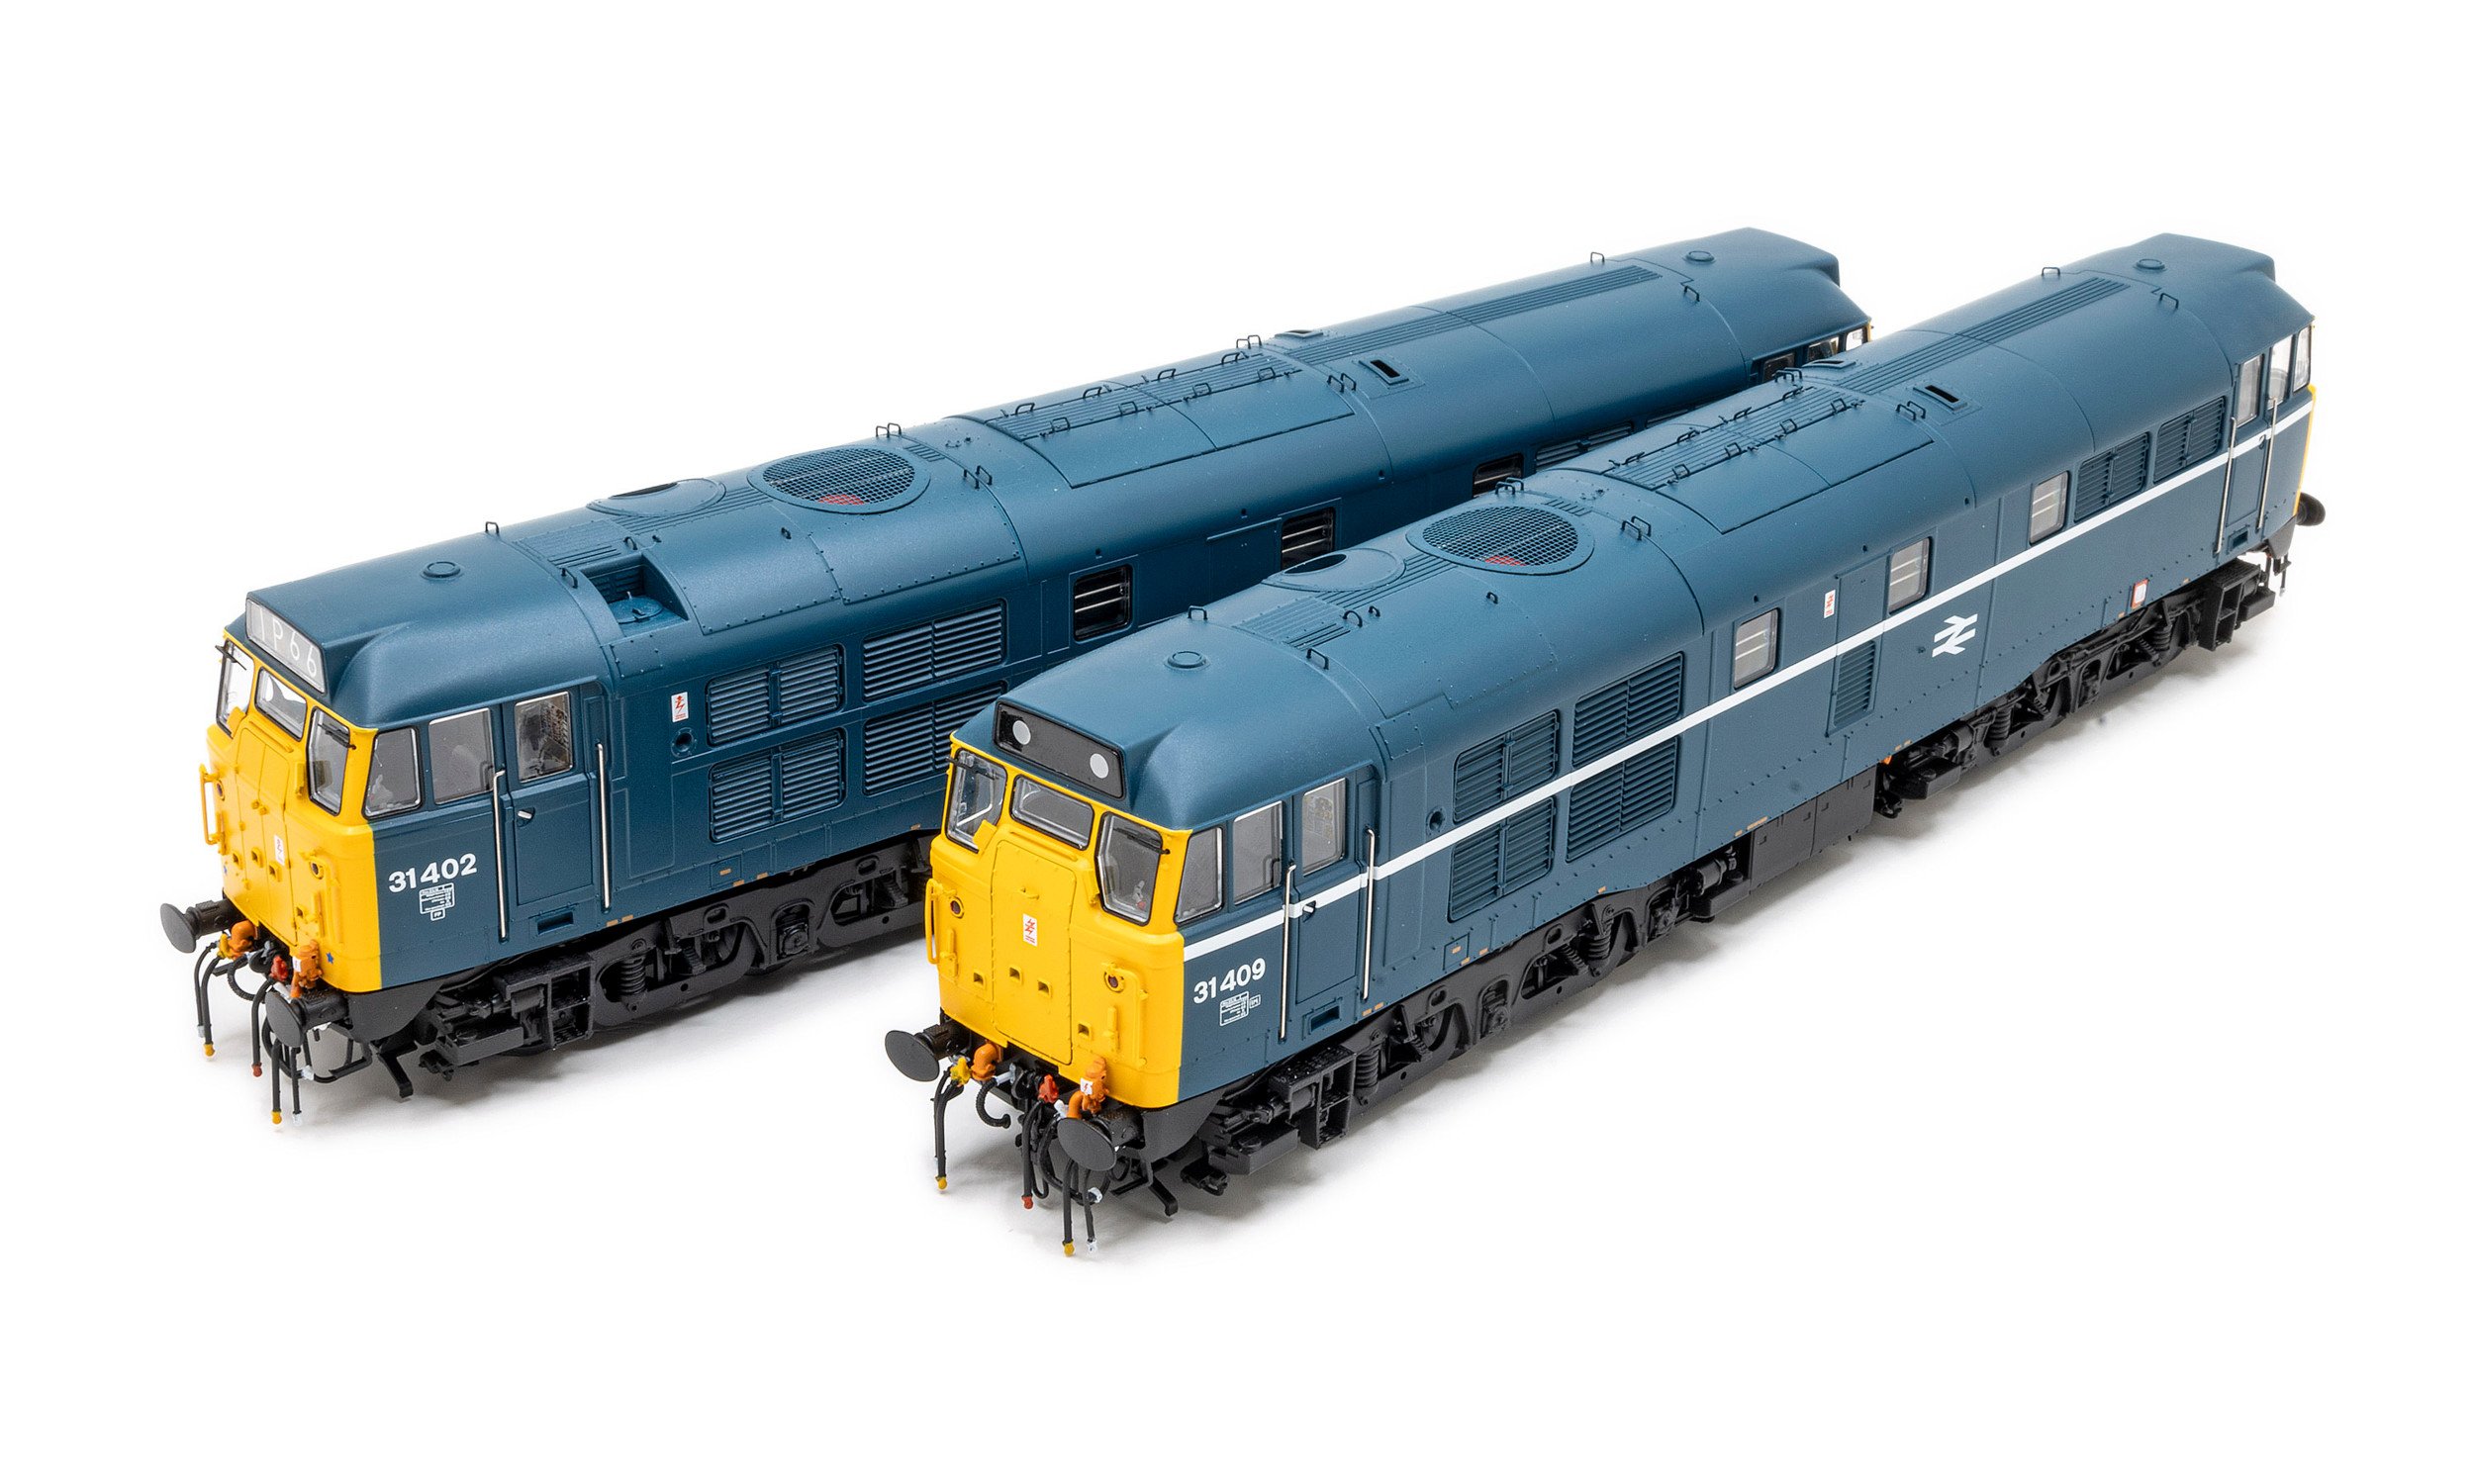 Batch one consists of six BR blue locomotives.